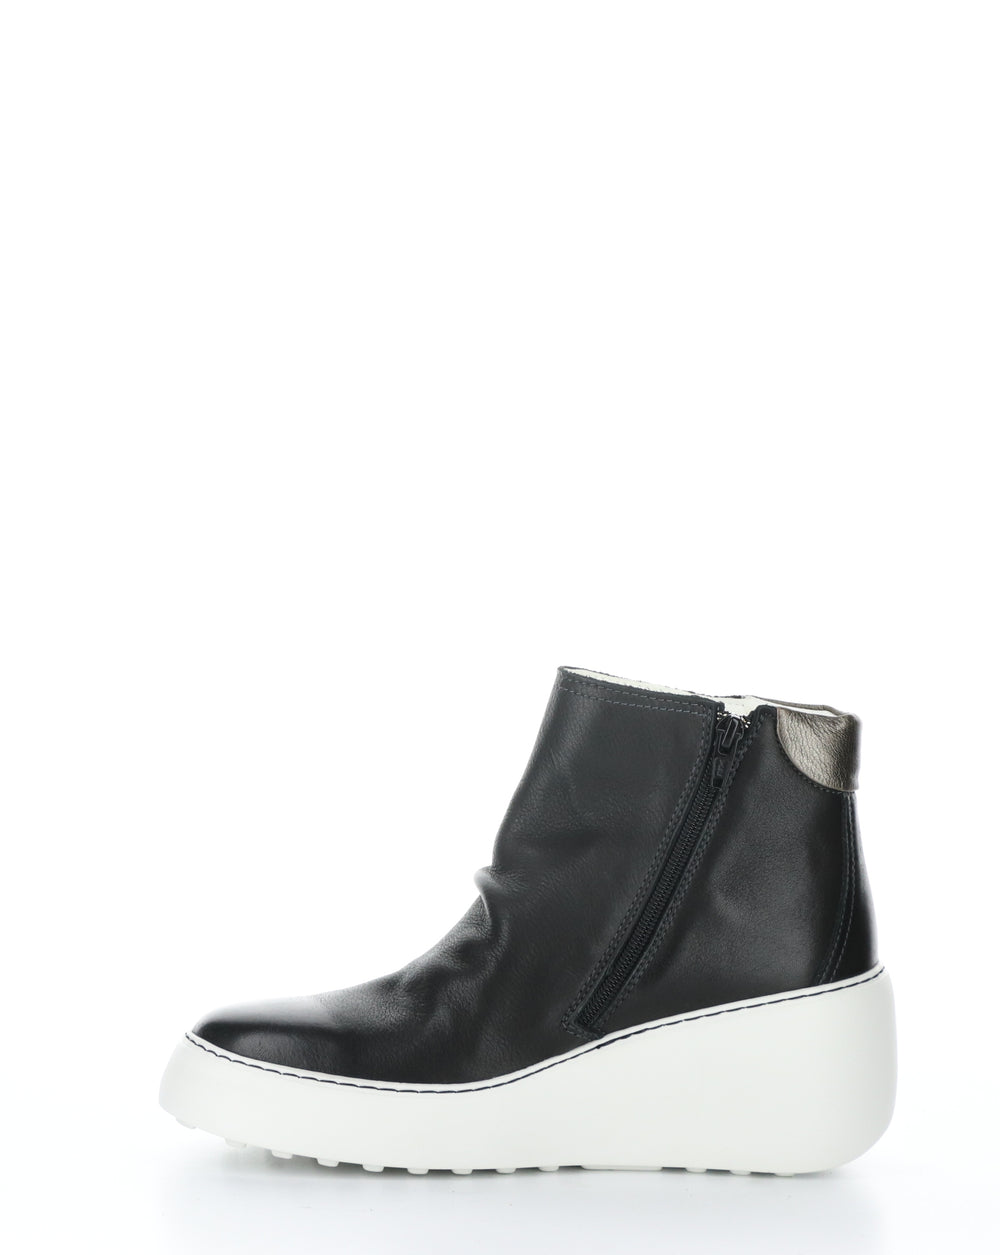 DABE461FLY 000 BLACK Round Toe Boots